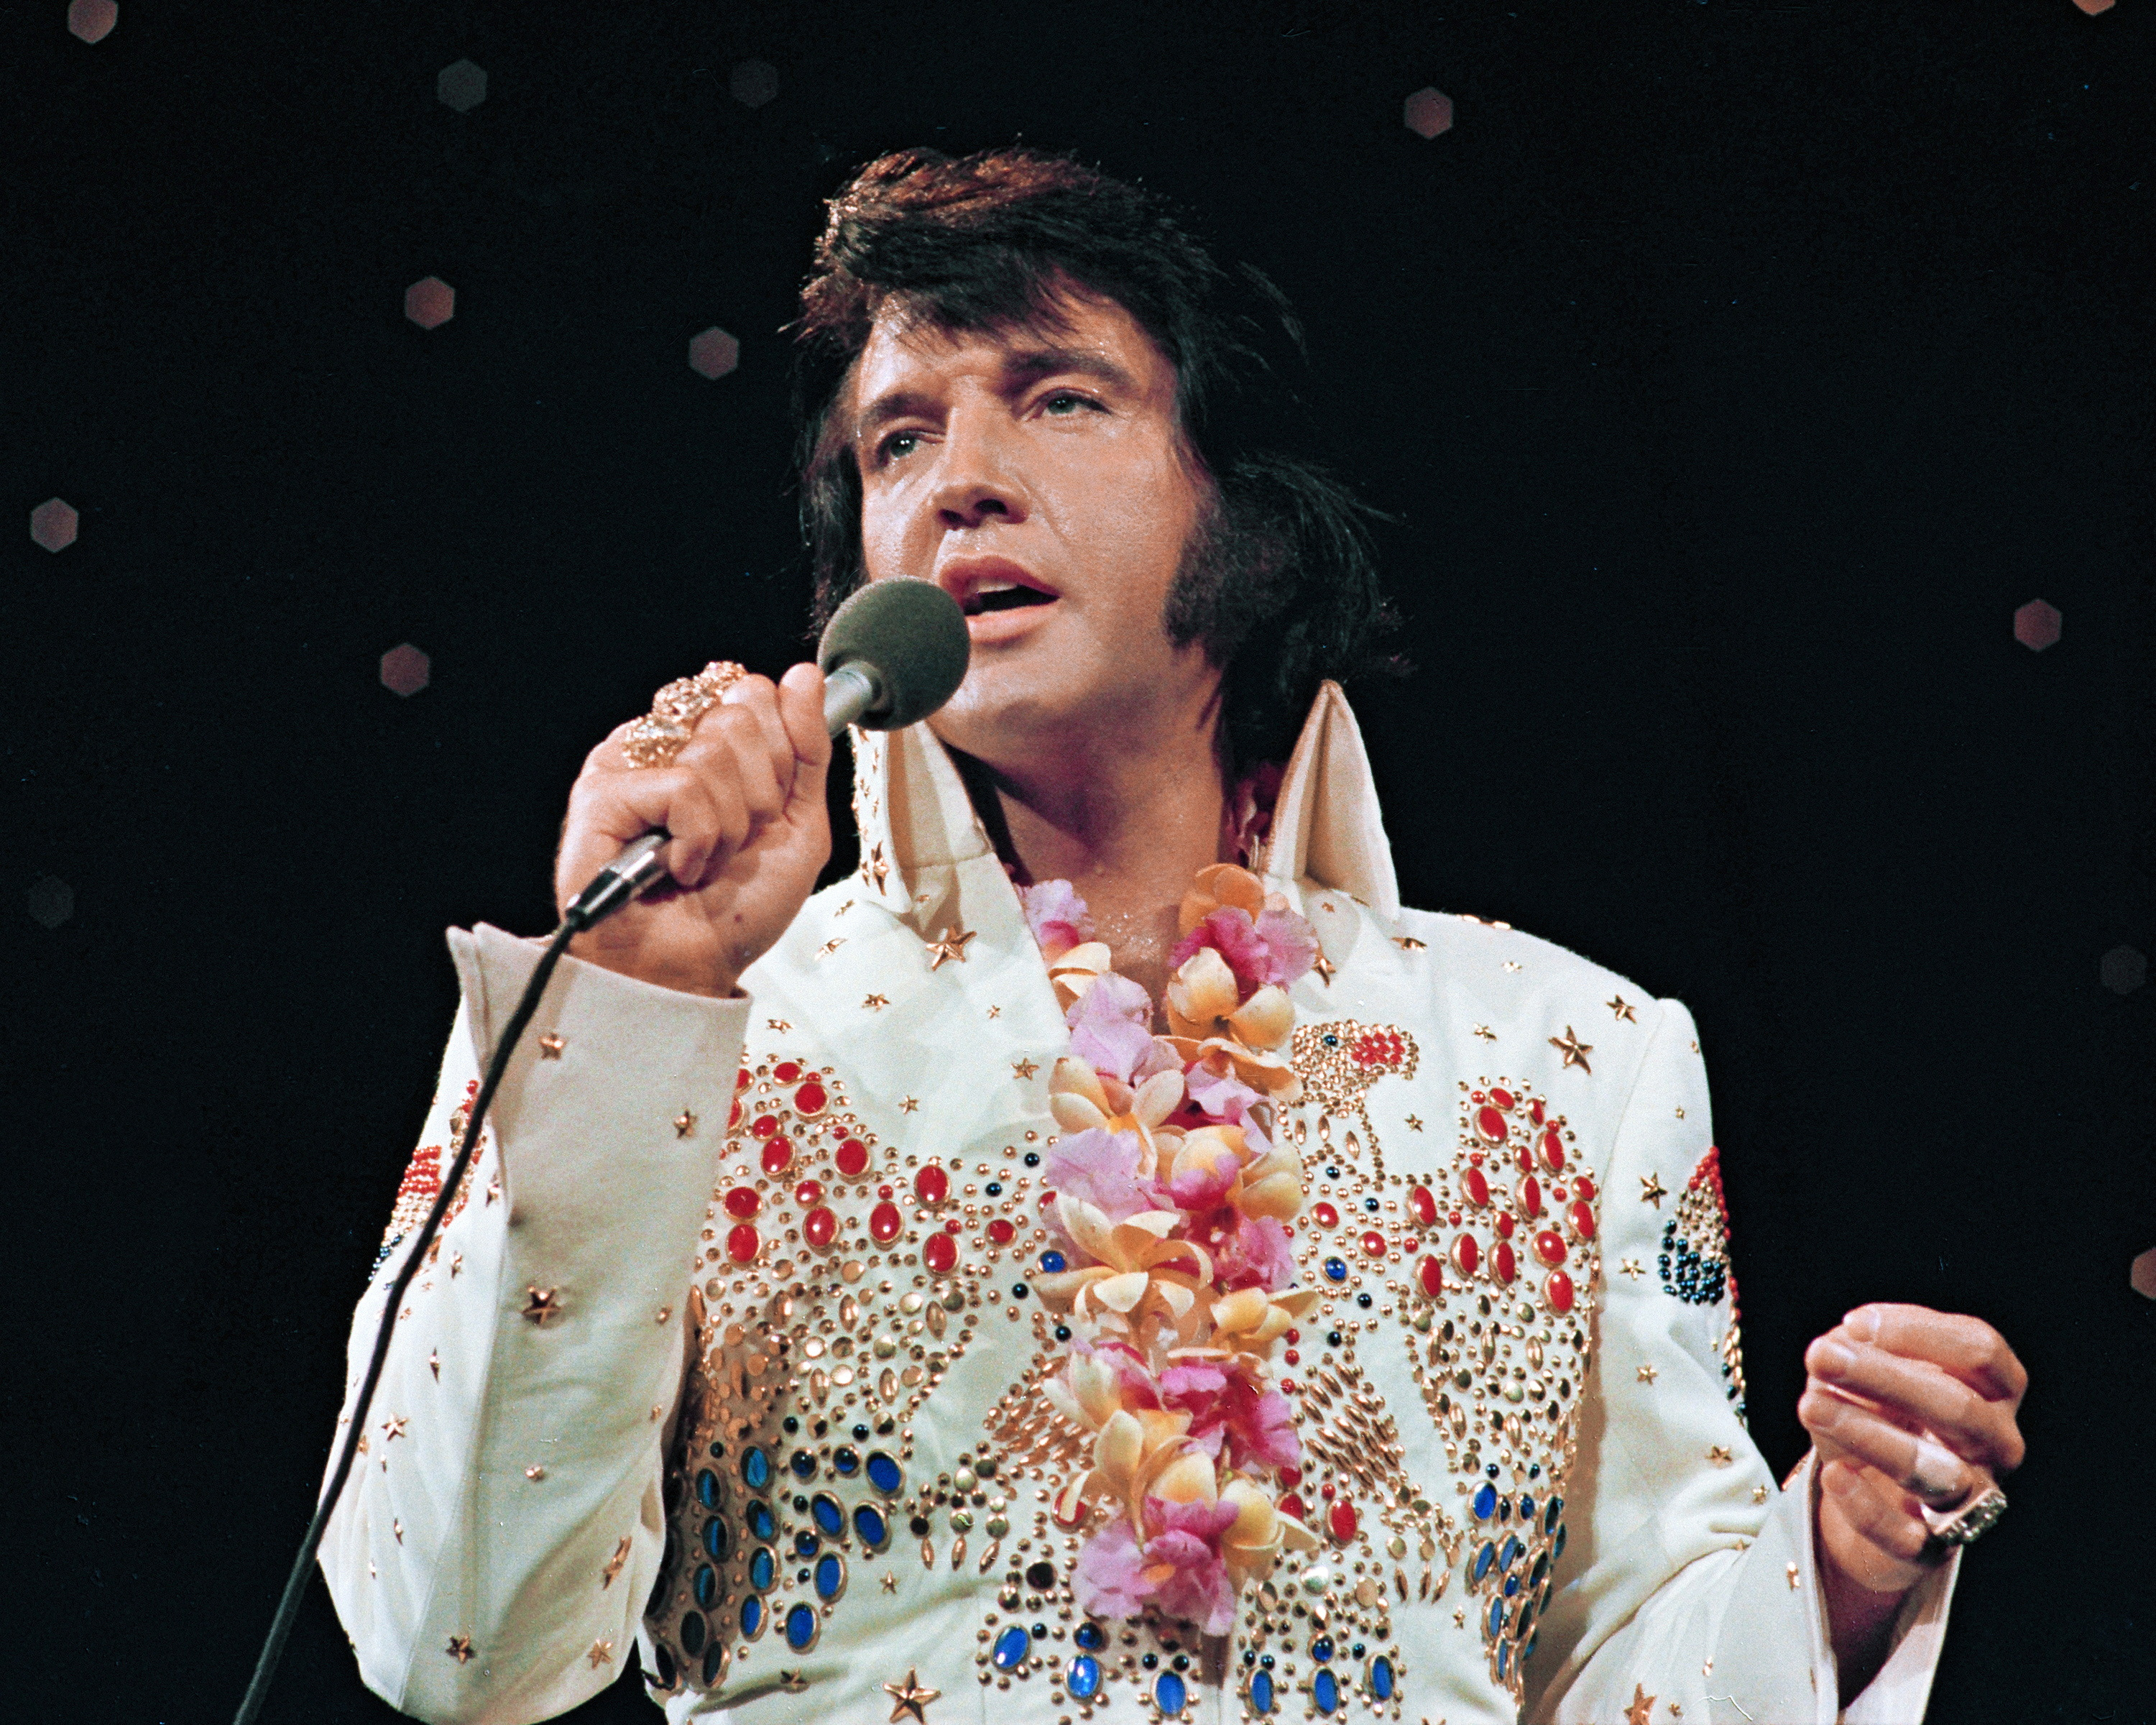 Elvis Presley performs at the "Aloha from Hawaii" concert special in Honolulu